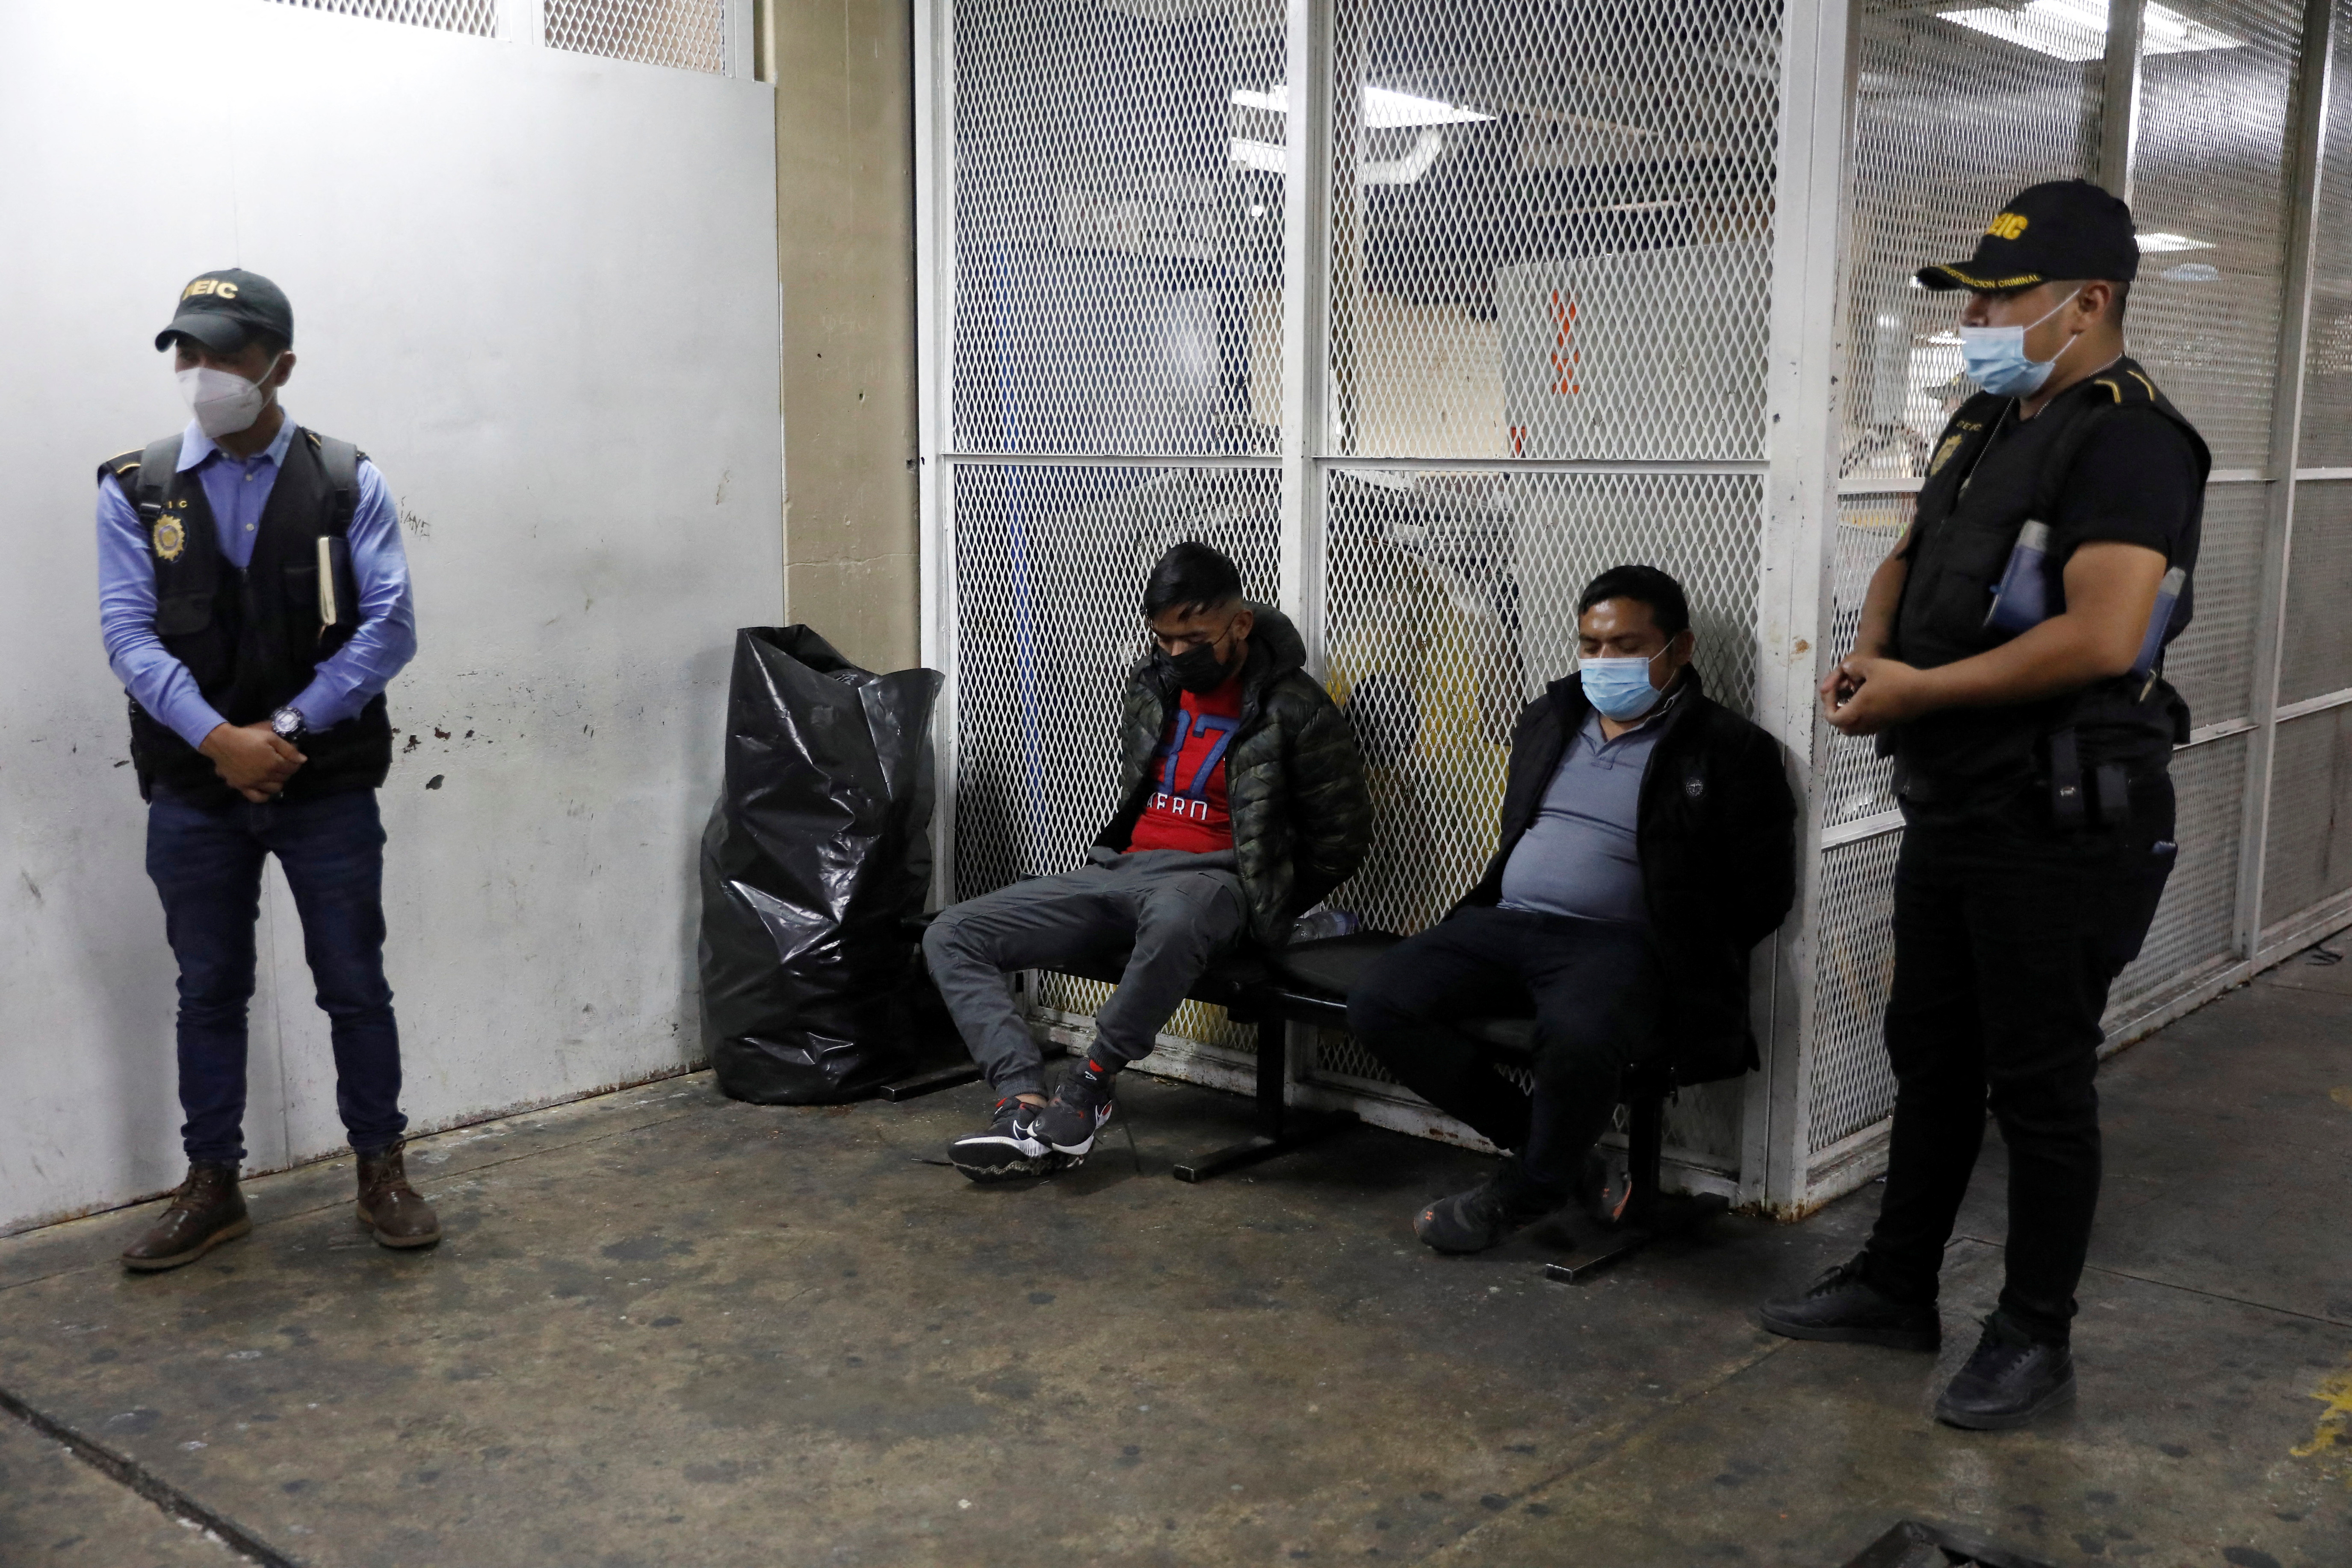 Two detained men sit in the basement of the Supreme Court of Justice in Guatemala City, Guatemala January 28, 2022. An operation by Guatemalan authorities, working with the U.S. Homeland Security agency to arrest people, conducted raids against a migrant smuggling group linked to the massacre of 19 people in Mexico last year. REUTERS/Luis Echeverria